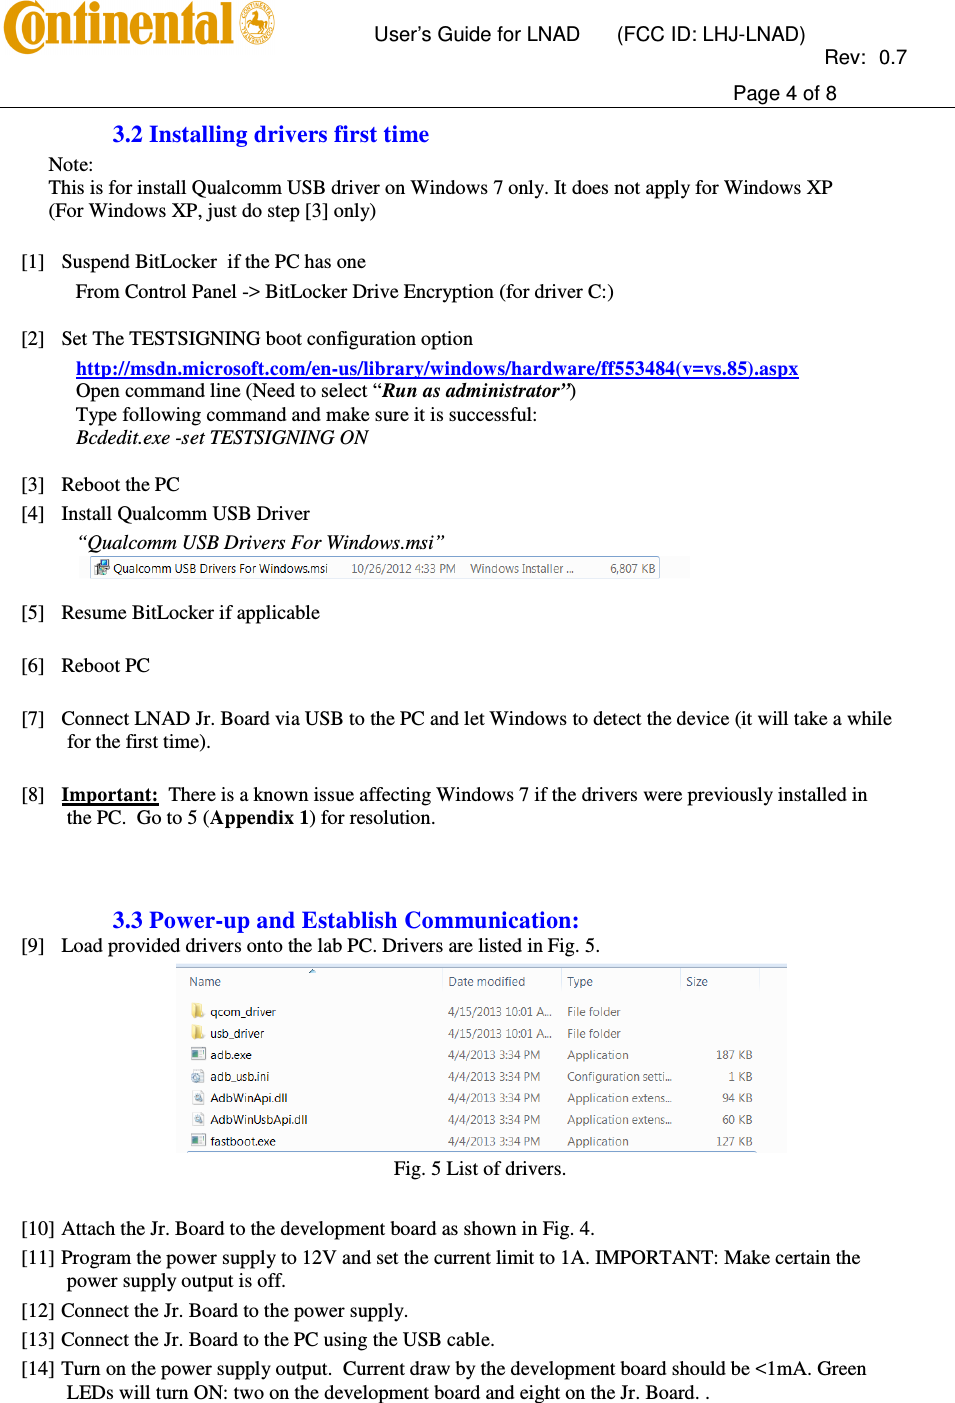       User’s Guide for LNAD  (FCC ID: LHJ-LNAD)          Rev:  0.7     Page 4 of 8  3.2 Installing drivers first time Note: This is for install Qualcomm USB driver on Windows 7 only. It does not apply for Windows XP (For Windows XP, just do step [3] only)   [1] Suspend BitLocker  if the PC has one From Control Panel -&gt; BitLocker Drive Encryption (for driver C:)  [2] Set The TESTSIGNING boot configuration option http://msdn.microsoft.com/en-us/library/windows/hardware/ff553484(v=vs.85).aspx Open command line (Need to select “Run as administrator”) Type following command and make sure it is successful: Bcdedit.exe -set TESTSIGNING ON  [3] Reboot the PC [4] Install Qualcomm USB Driver “Qualcomm USB Drivers For Windows.msi”   [5] Resume BitLocker if applicable  [6] Reboot PC  [7] Connect LNAD Jr. Board via USB to the PC and let Windows to detect the device (it will take a while for the first time).  [8] Important:  There is a known issue affecting Windows 7 if the drivers were previously installed in the PC.  Go to 5 (Appendix 1) for resolution.    3.3 Power-up and Establish Communication: [9] Load provided drivers onto the lab PC. Drivers are listed in Fig. 5.  Fig. 5 List of drivers.  [10] Attach the Jr. Board to the development board as shown in Fig. 4. [11] Program the power supply to 12V and set the current limit to 1A. IMPORTANT: Make certain the power supply output is off. [12] Connect the Jr. Board to the power supply. [13] Connect the Jr. Board to the PC using the USB cable.   [14] Turn on the power supply output.  Current draw by the development board should be &lt;1mA. Green LEDs will turn ON: two on the development board and eight on the Jr. Board. . 